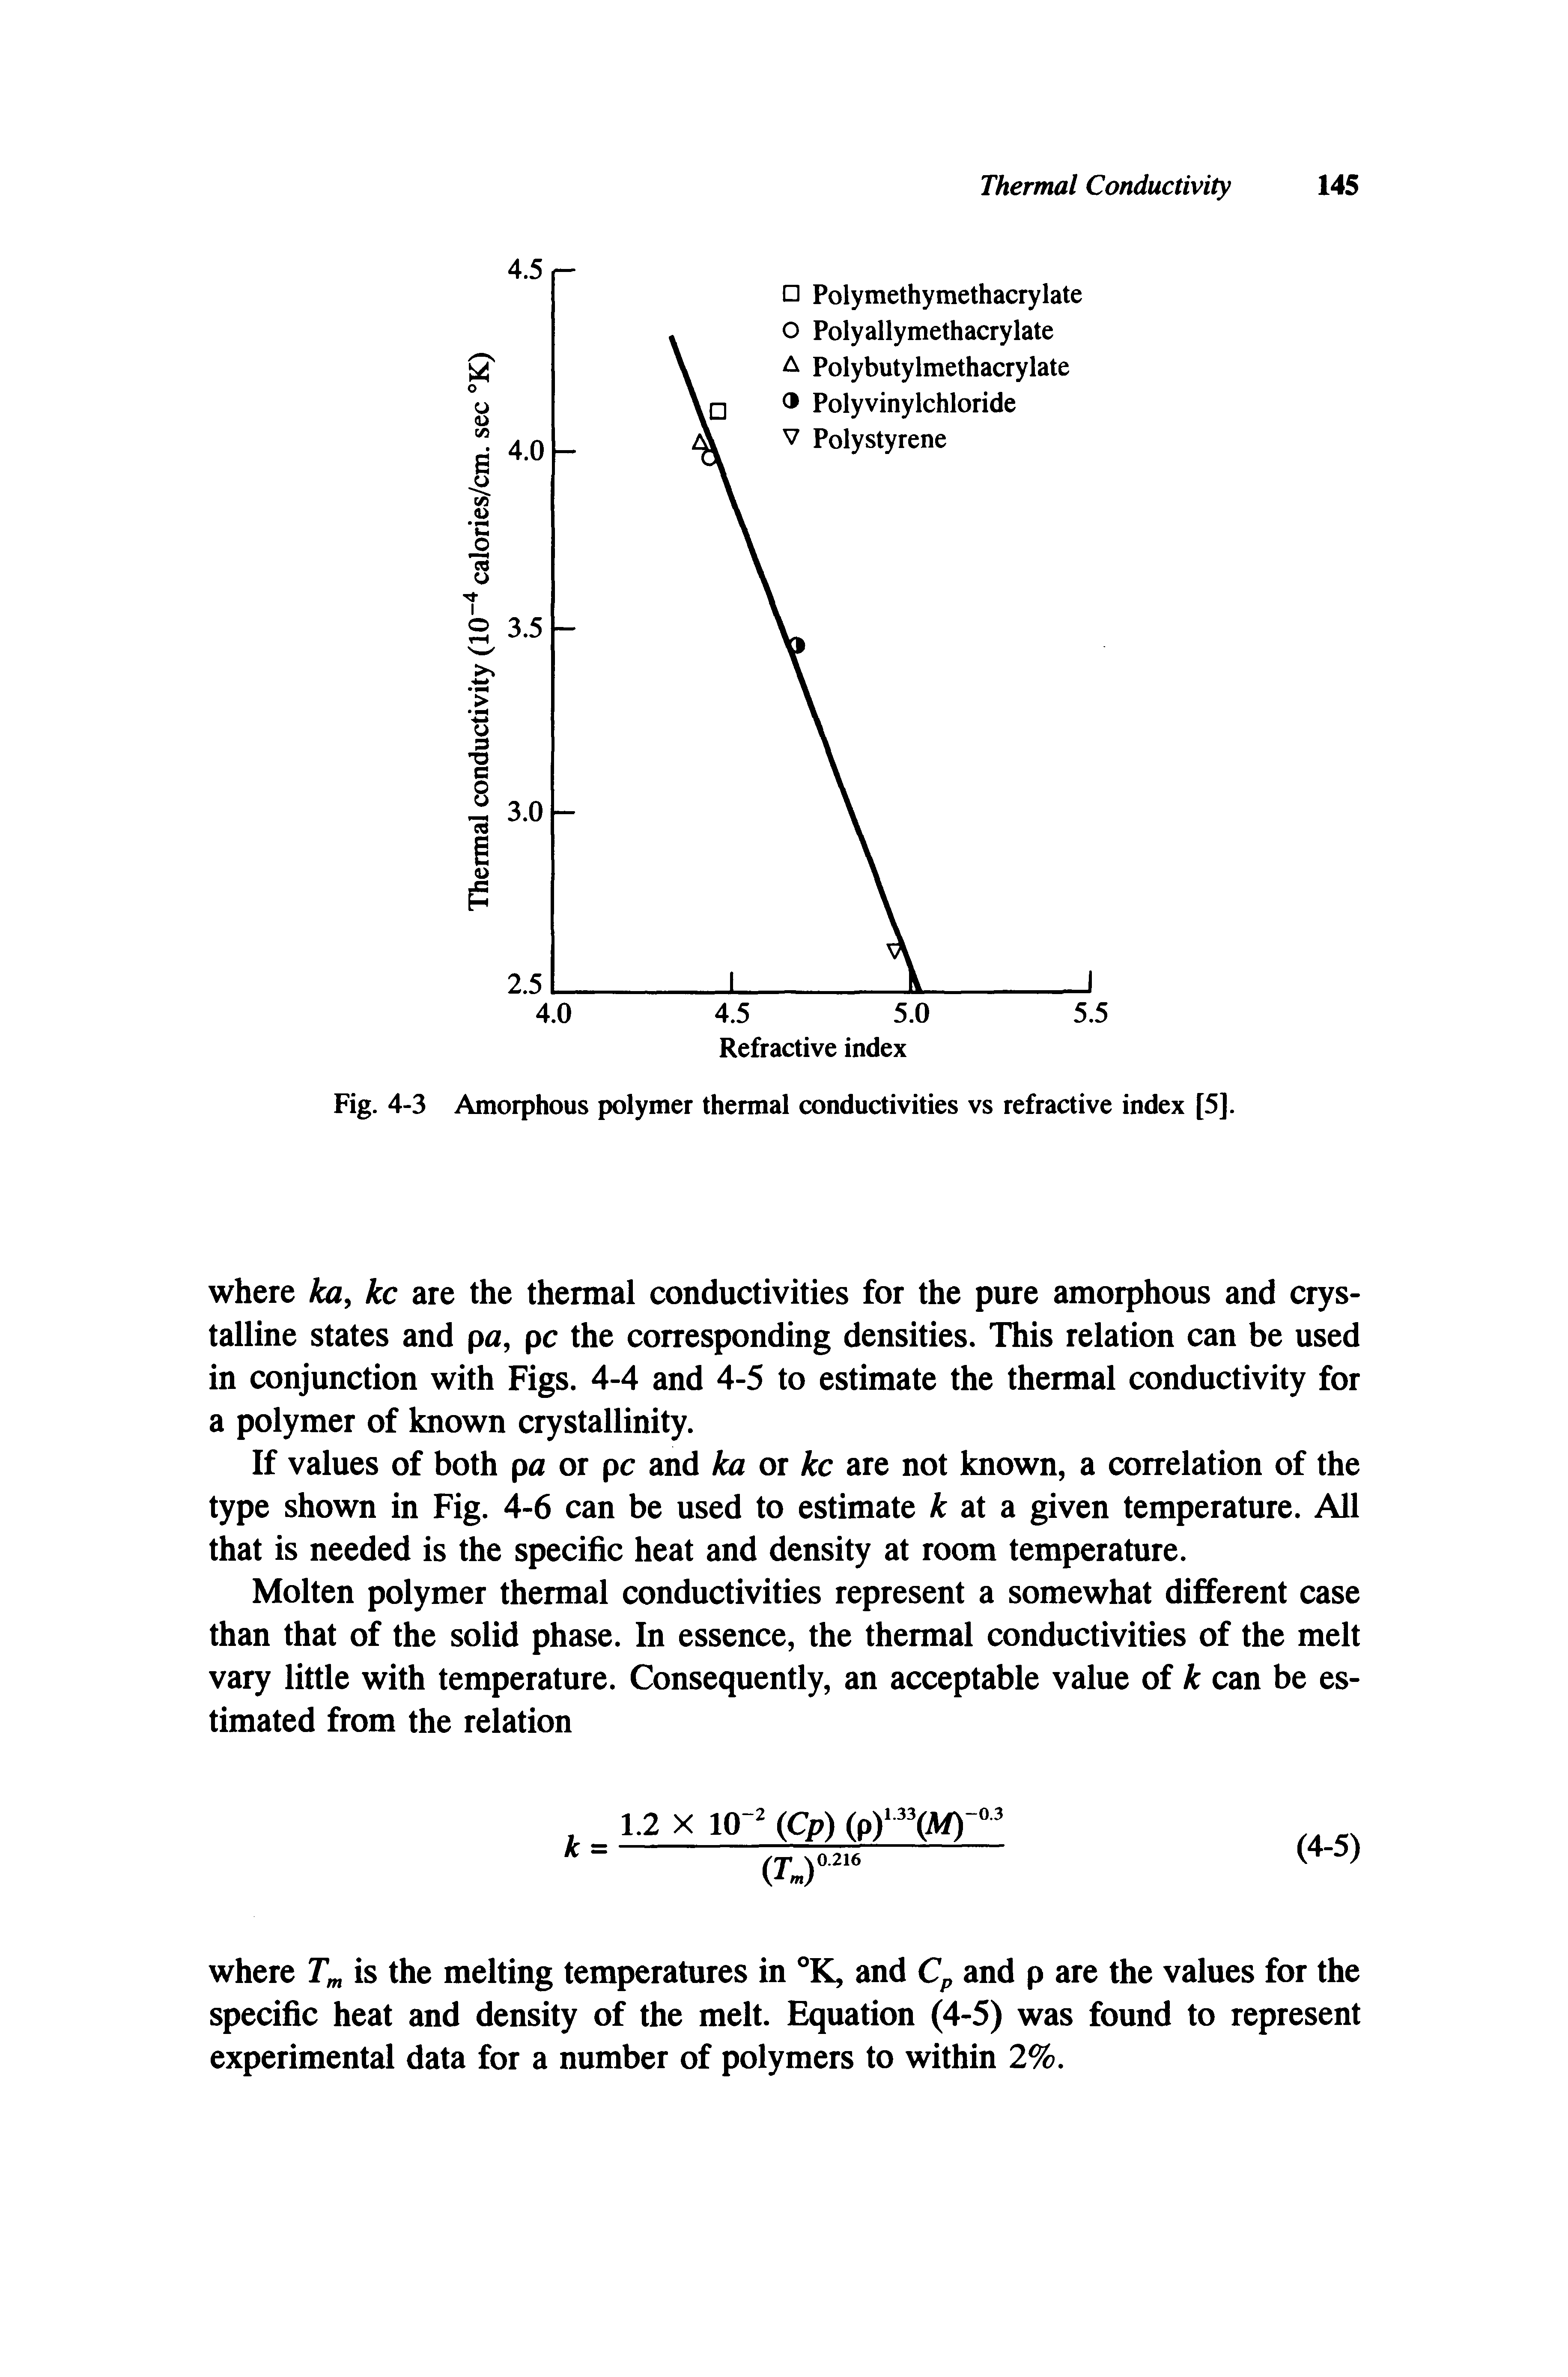 Fig. 4-3 Amorphous polymer thermal conductivities vs refractive index [5].